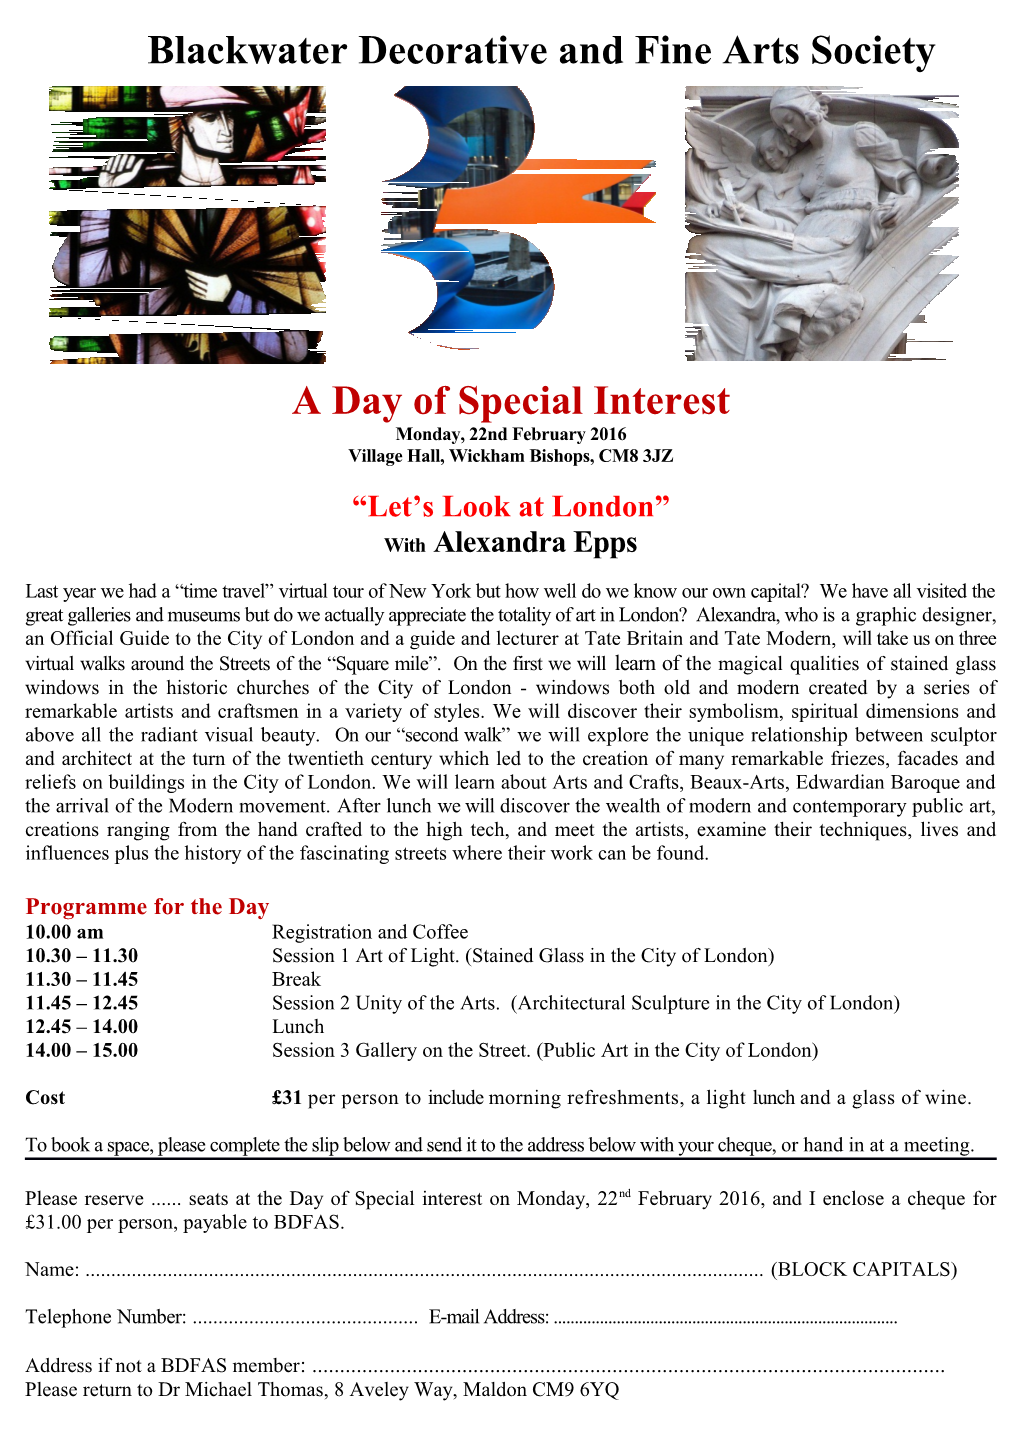 A Day of Special Interest